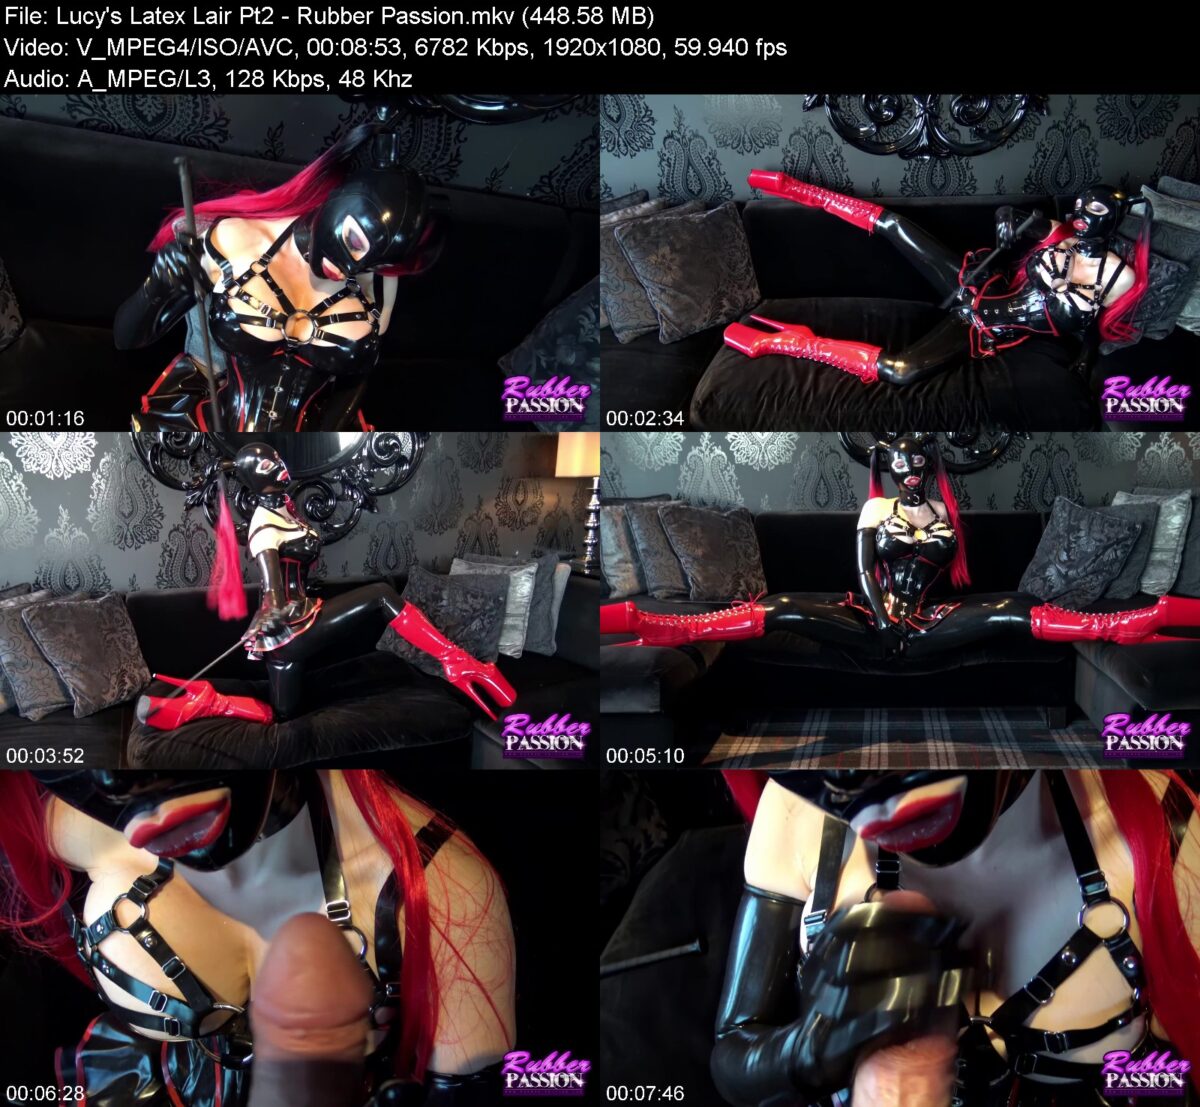 Lucy's Latex Lair Pt2 in Rubber Passion